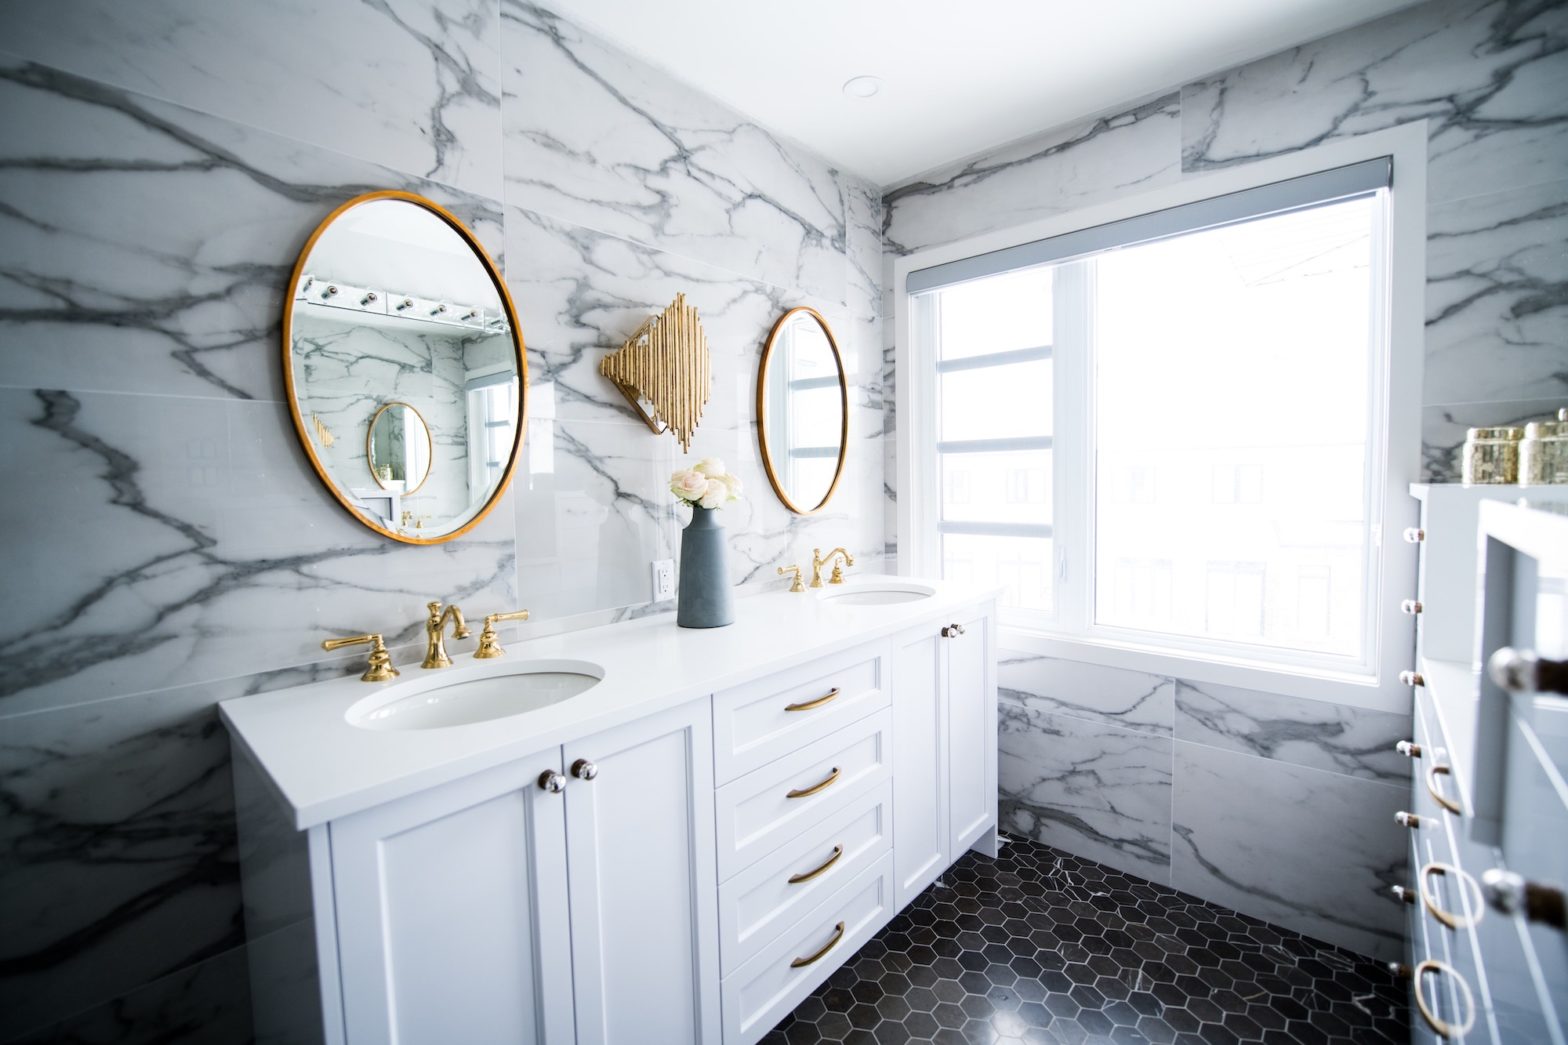 RUPP’s Contractors Take Bathroom Remodels to the Next Level. Contact Them Today for a Quote on Your Remodeling Project.